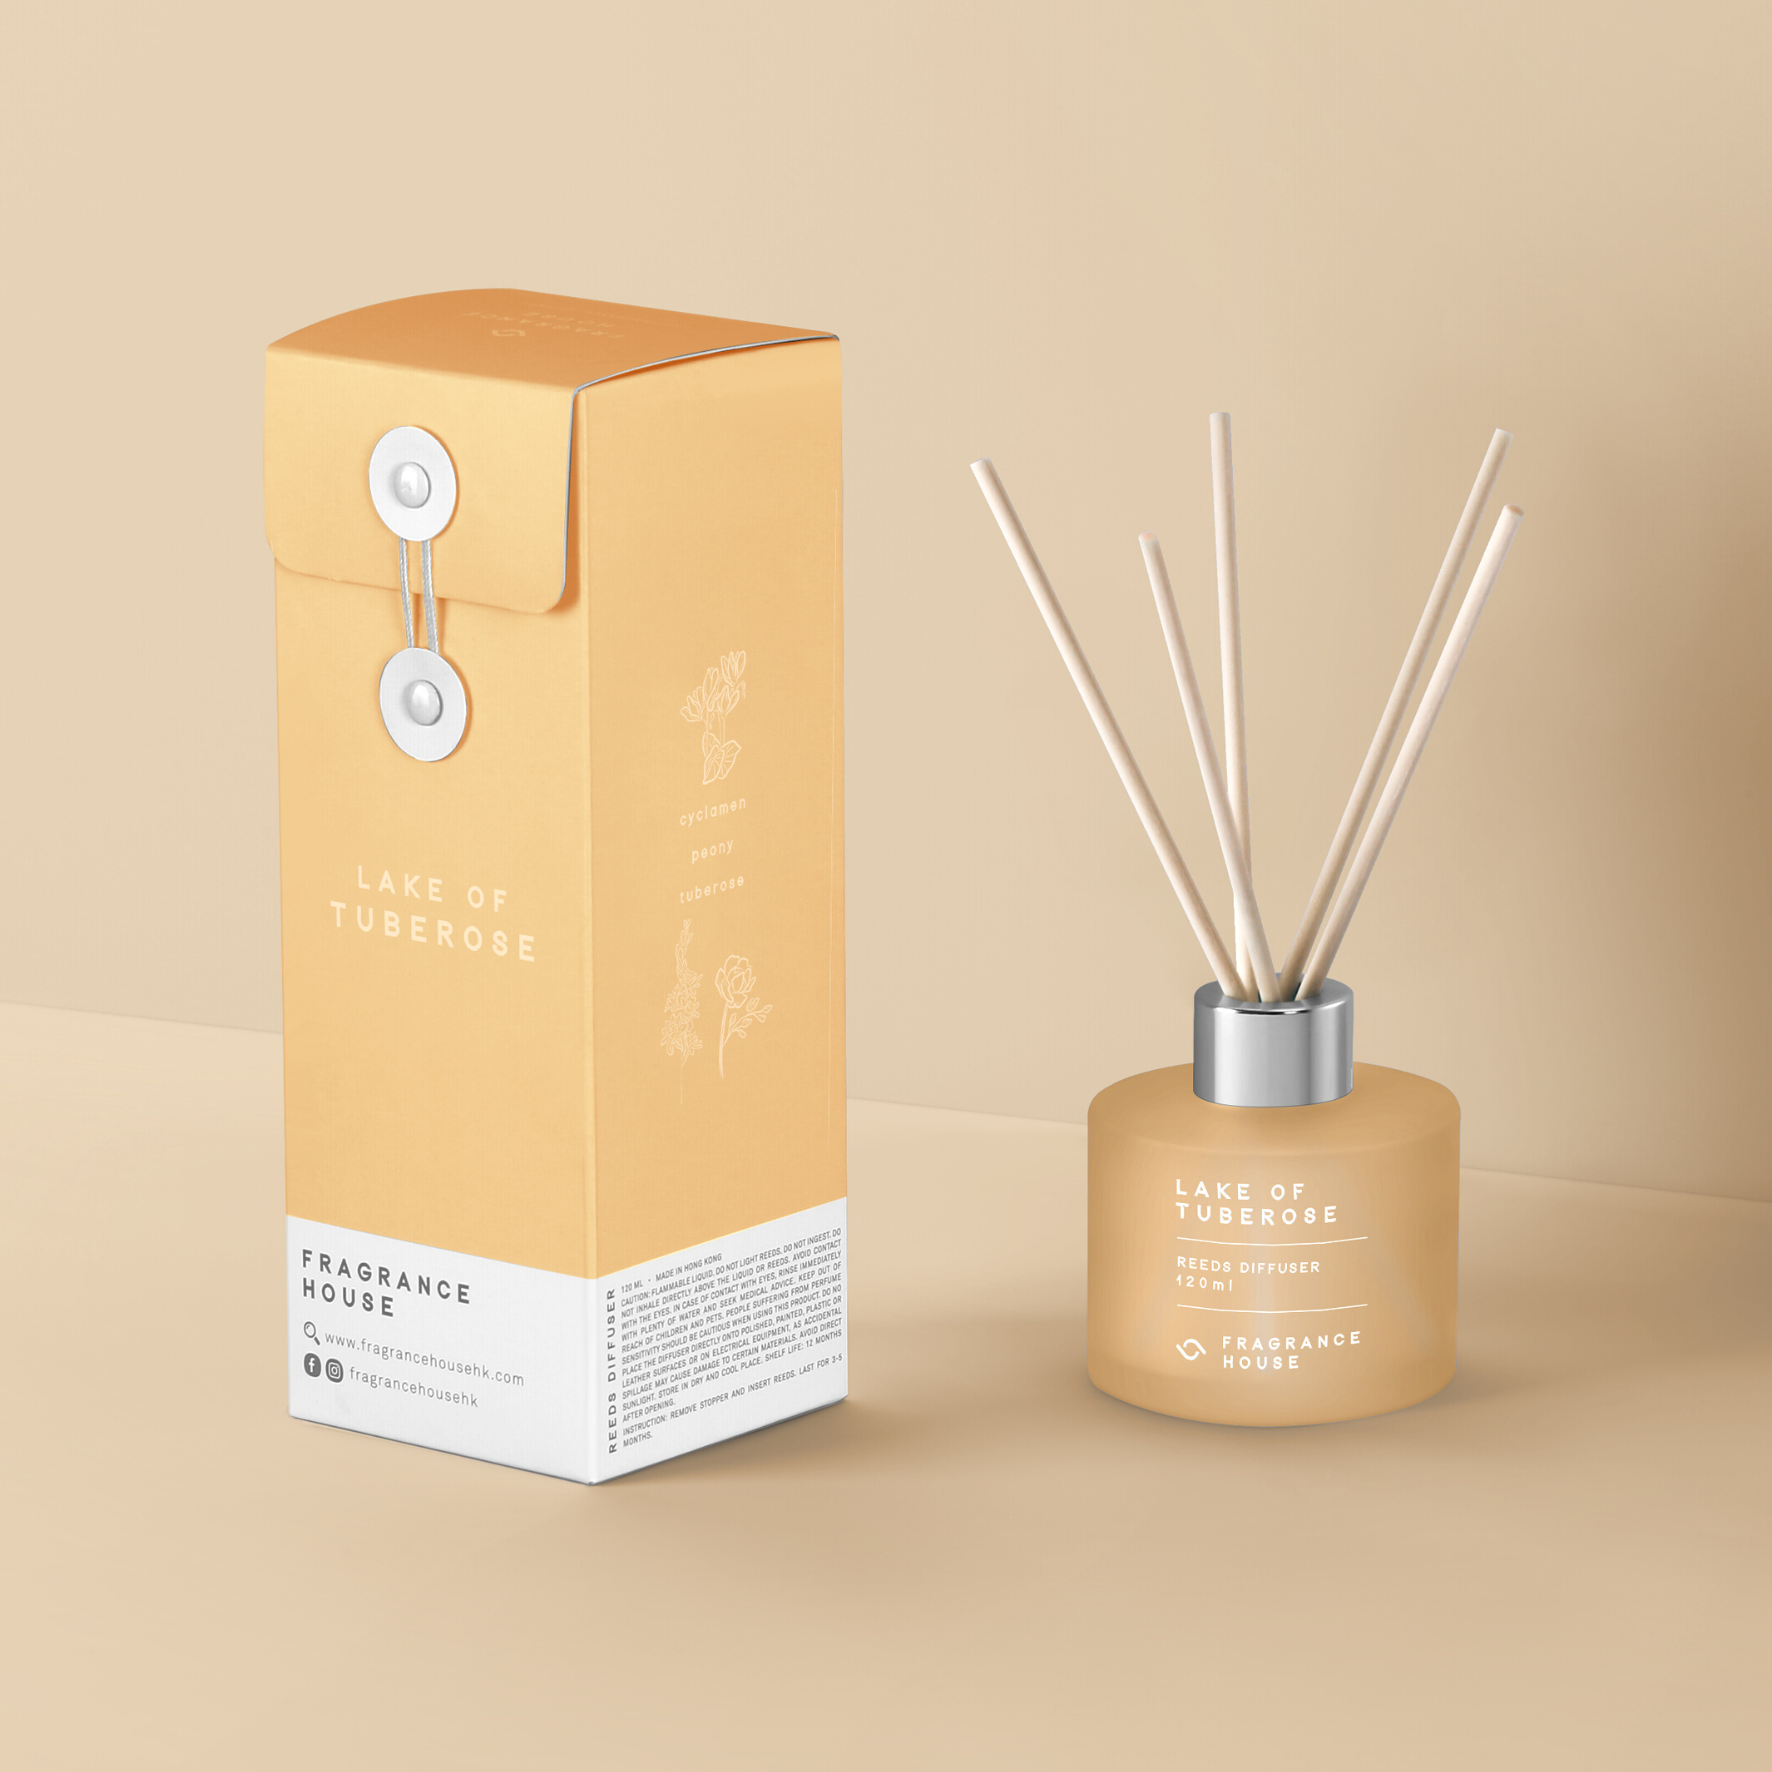 Pavilion White Tea Diffuser with packing 亭下白茶藤枝香薰連包裝